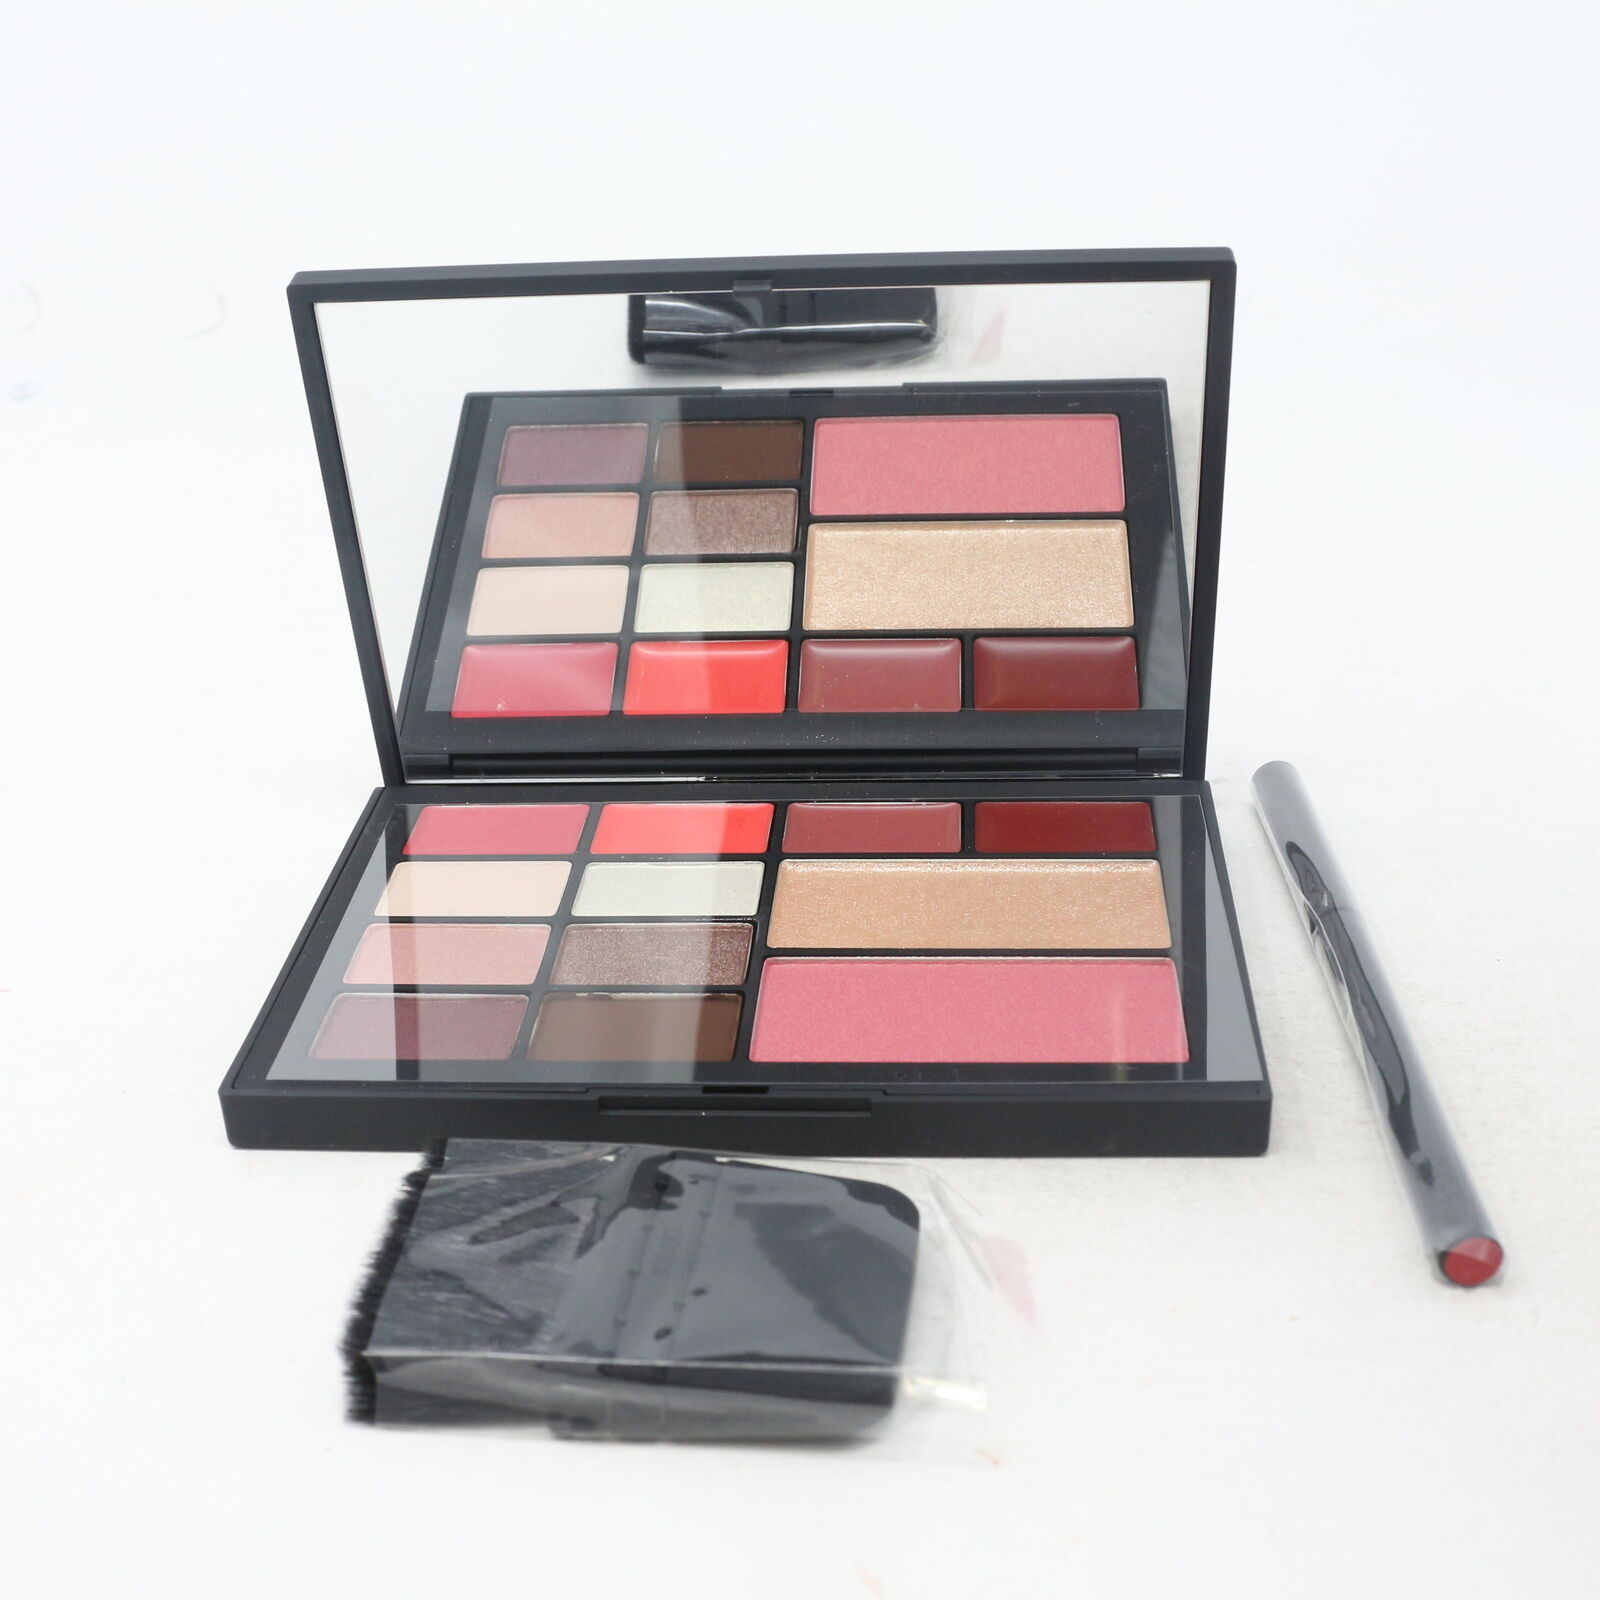 Nars Traveler's Exclusive Jetsetter Face New Box Palette Easy-to-use Oakland Mall With